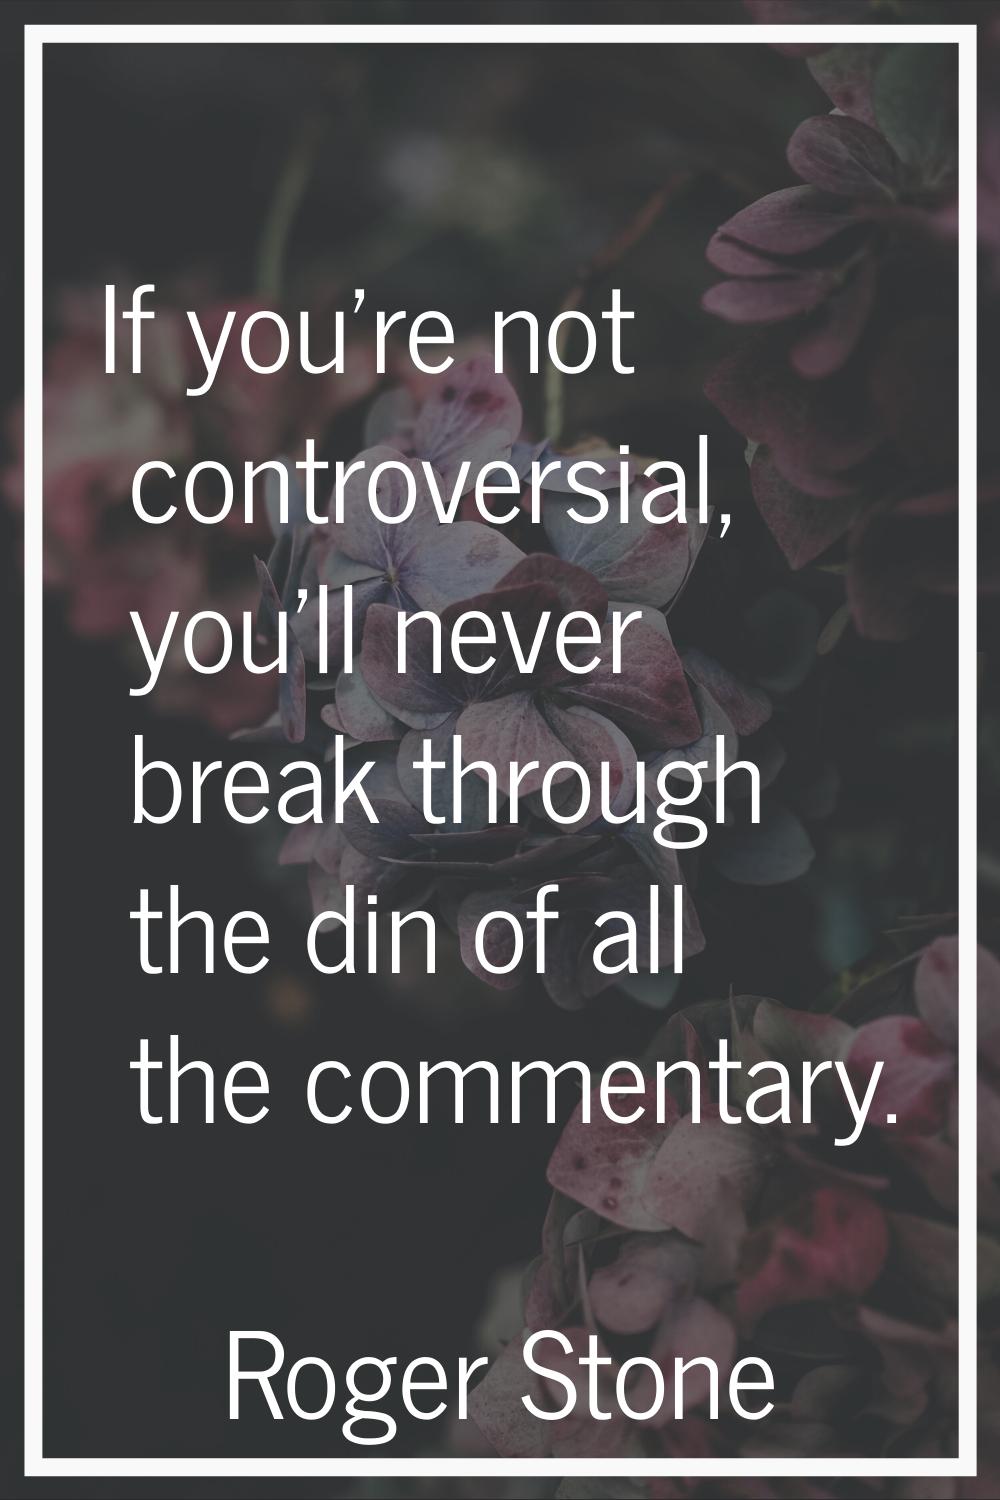 If you're not controversial, you'll never break through the din of all the commentary.